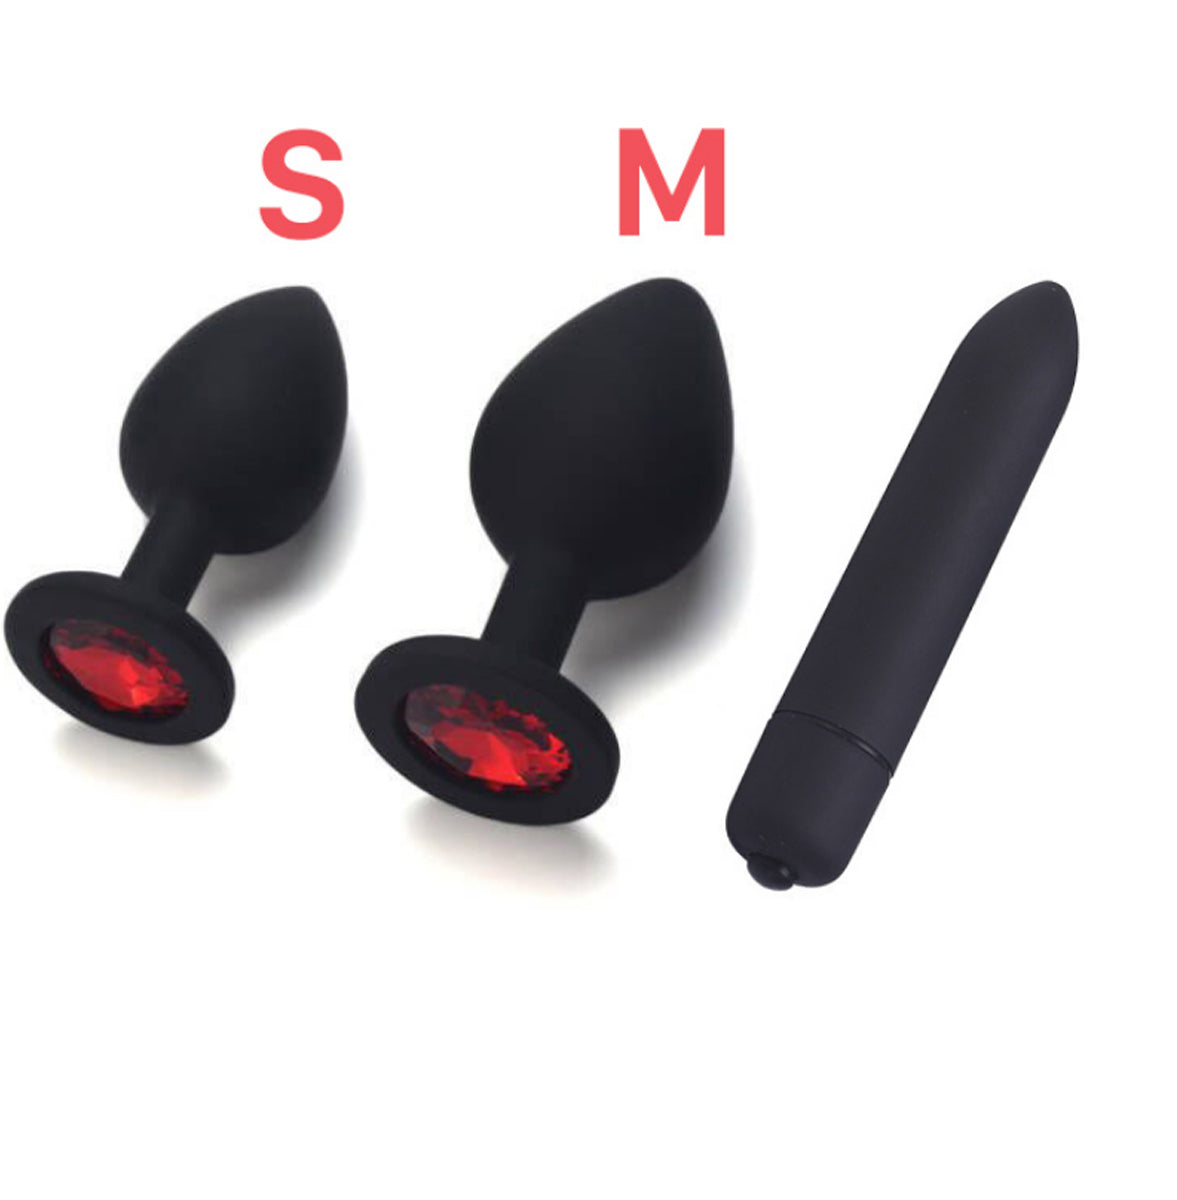 TPFSecret Juwel anal plug set of 3 with vibrator - with red gemstone - different sizes